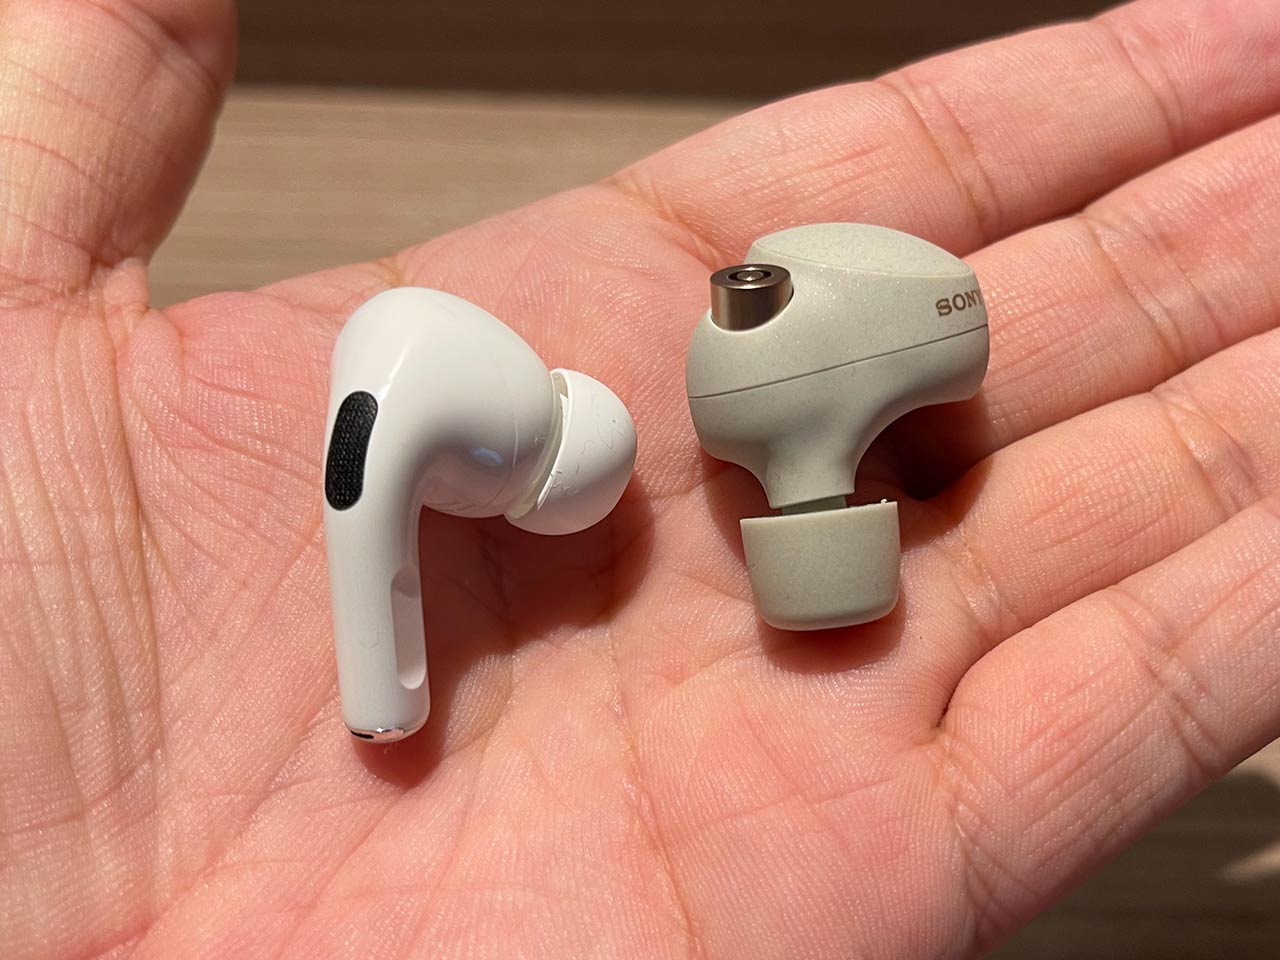 ▲ Compare AirPods Pro and XM4.  AirPods Pro have a shape that extends from the microphone portion to the bottom.  The XM4 itself is large, but no part comes out of the ear